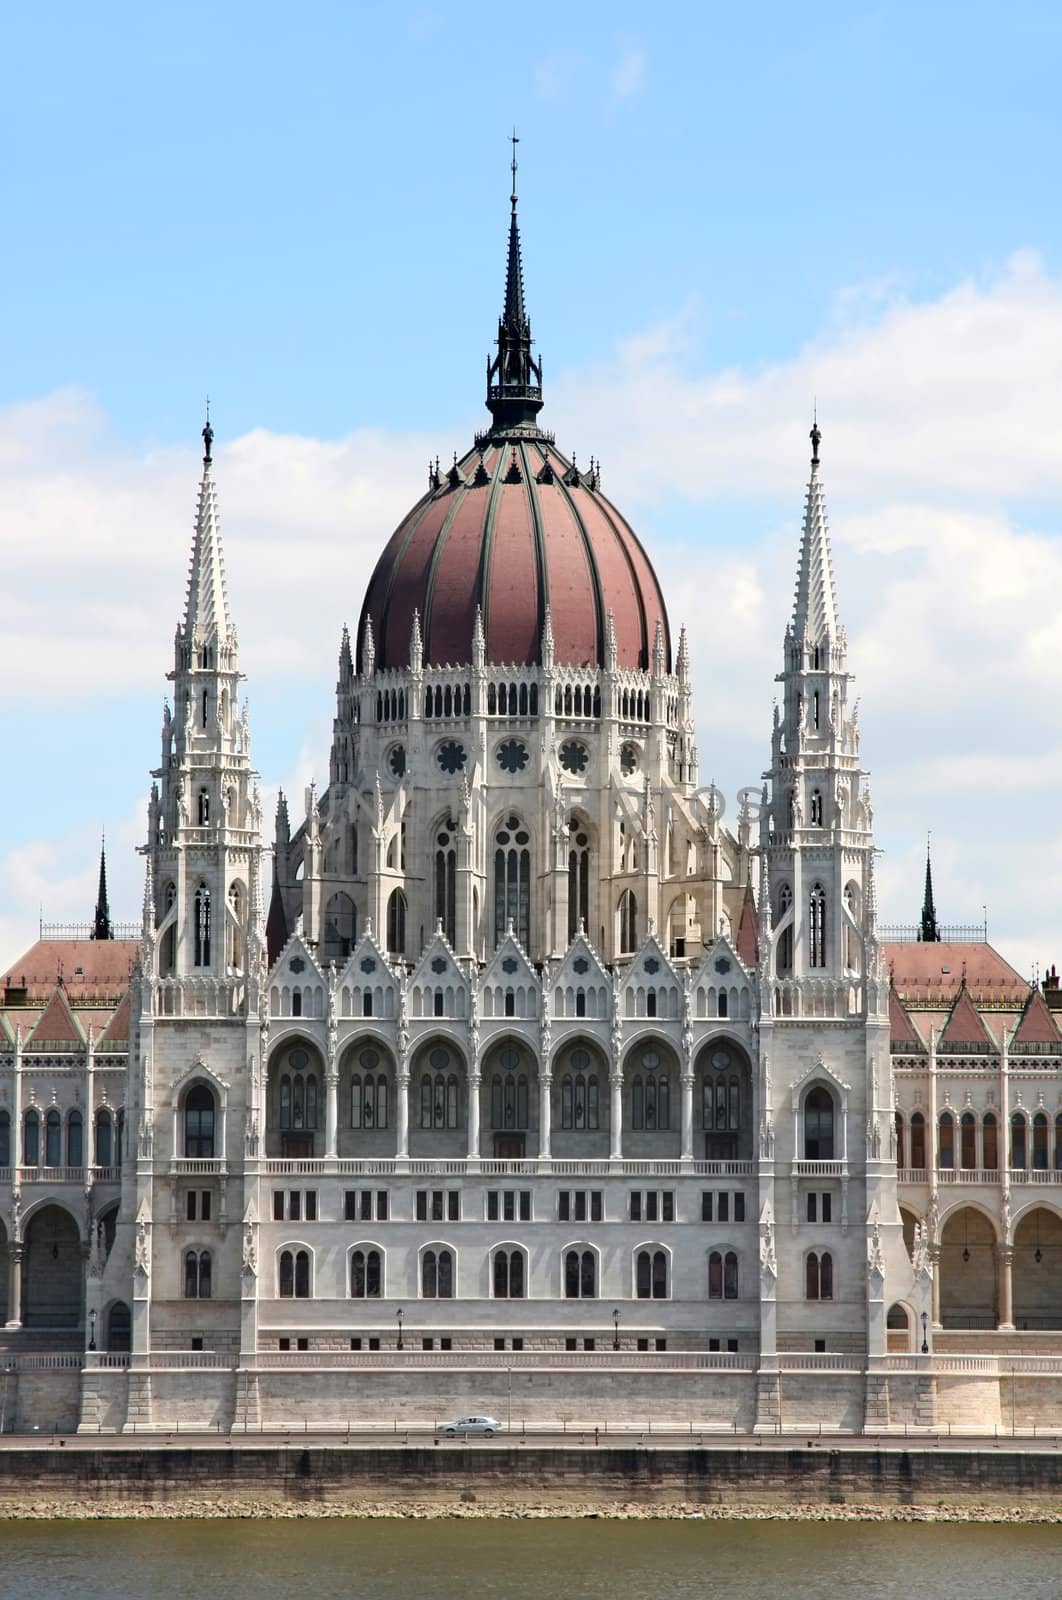 The parliament building in Budapest, Hungary